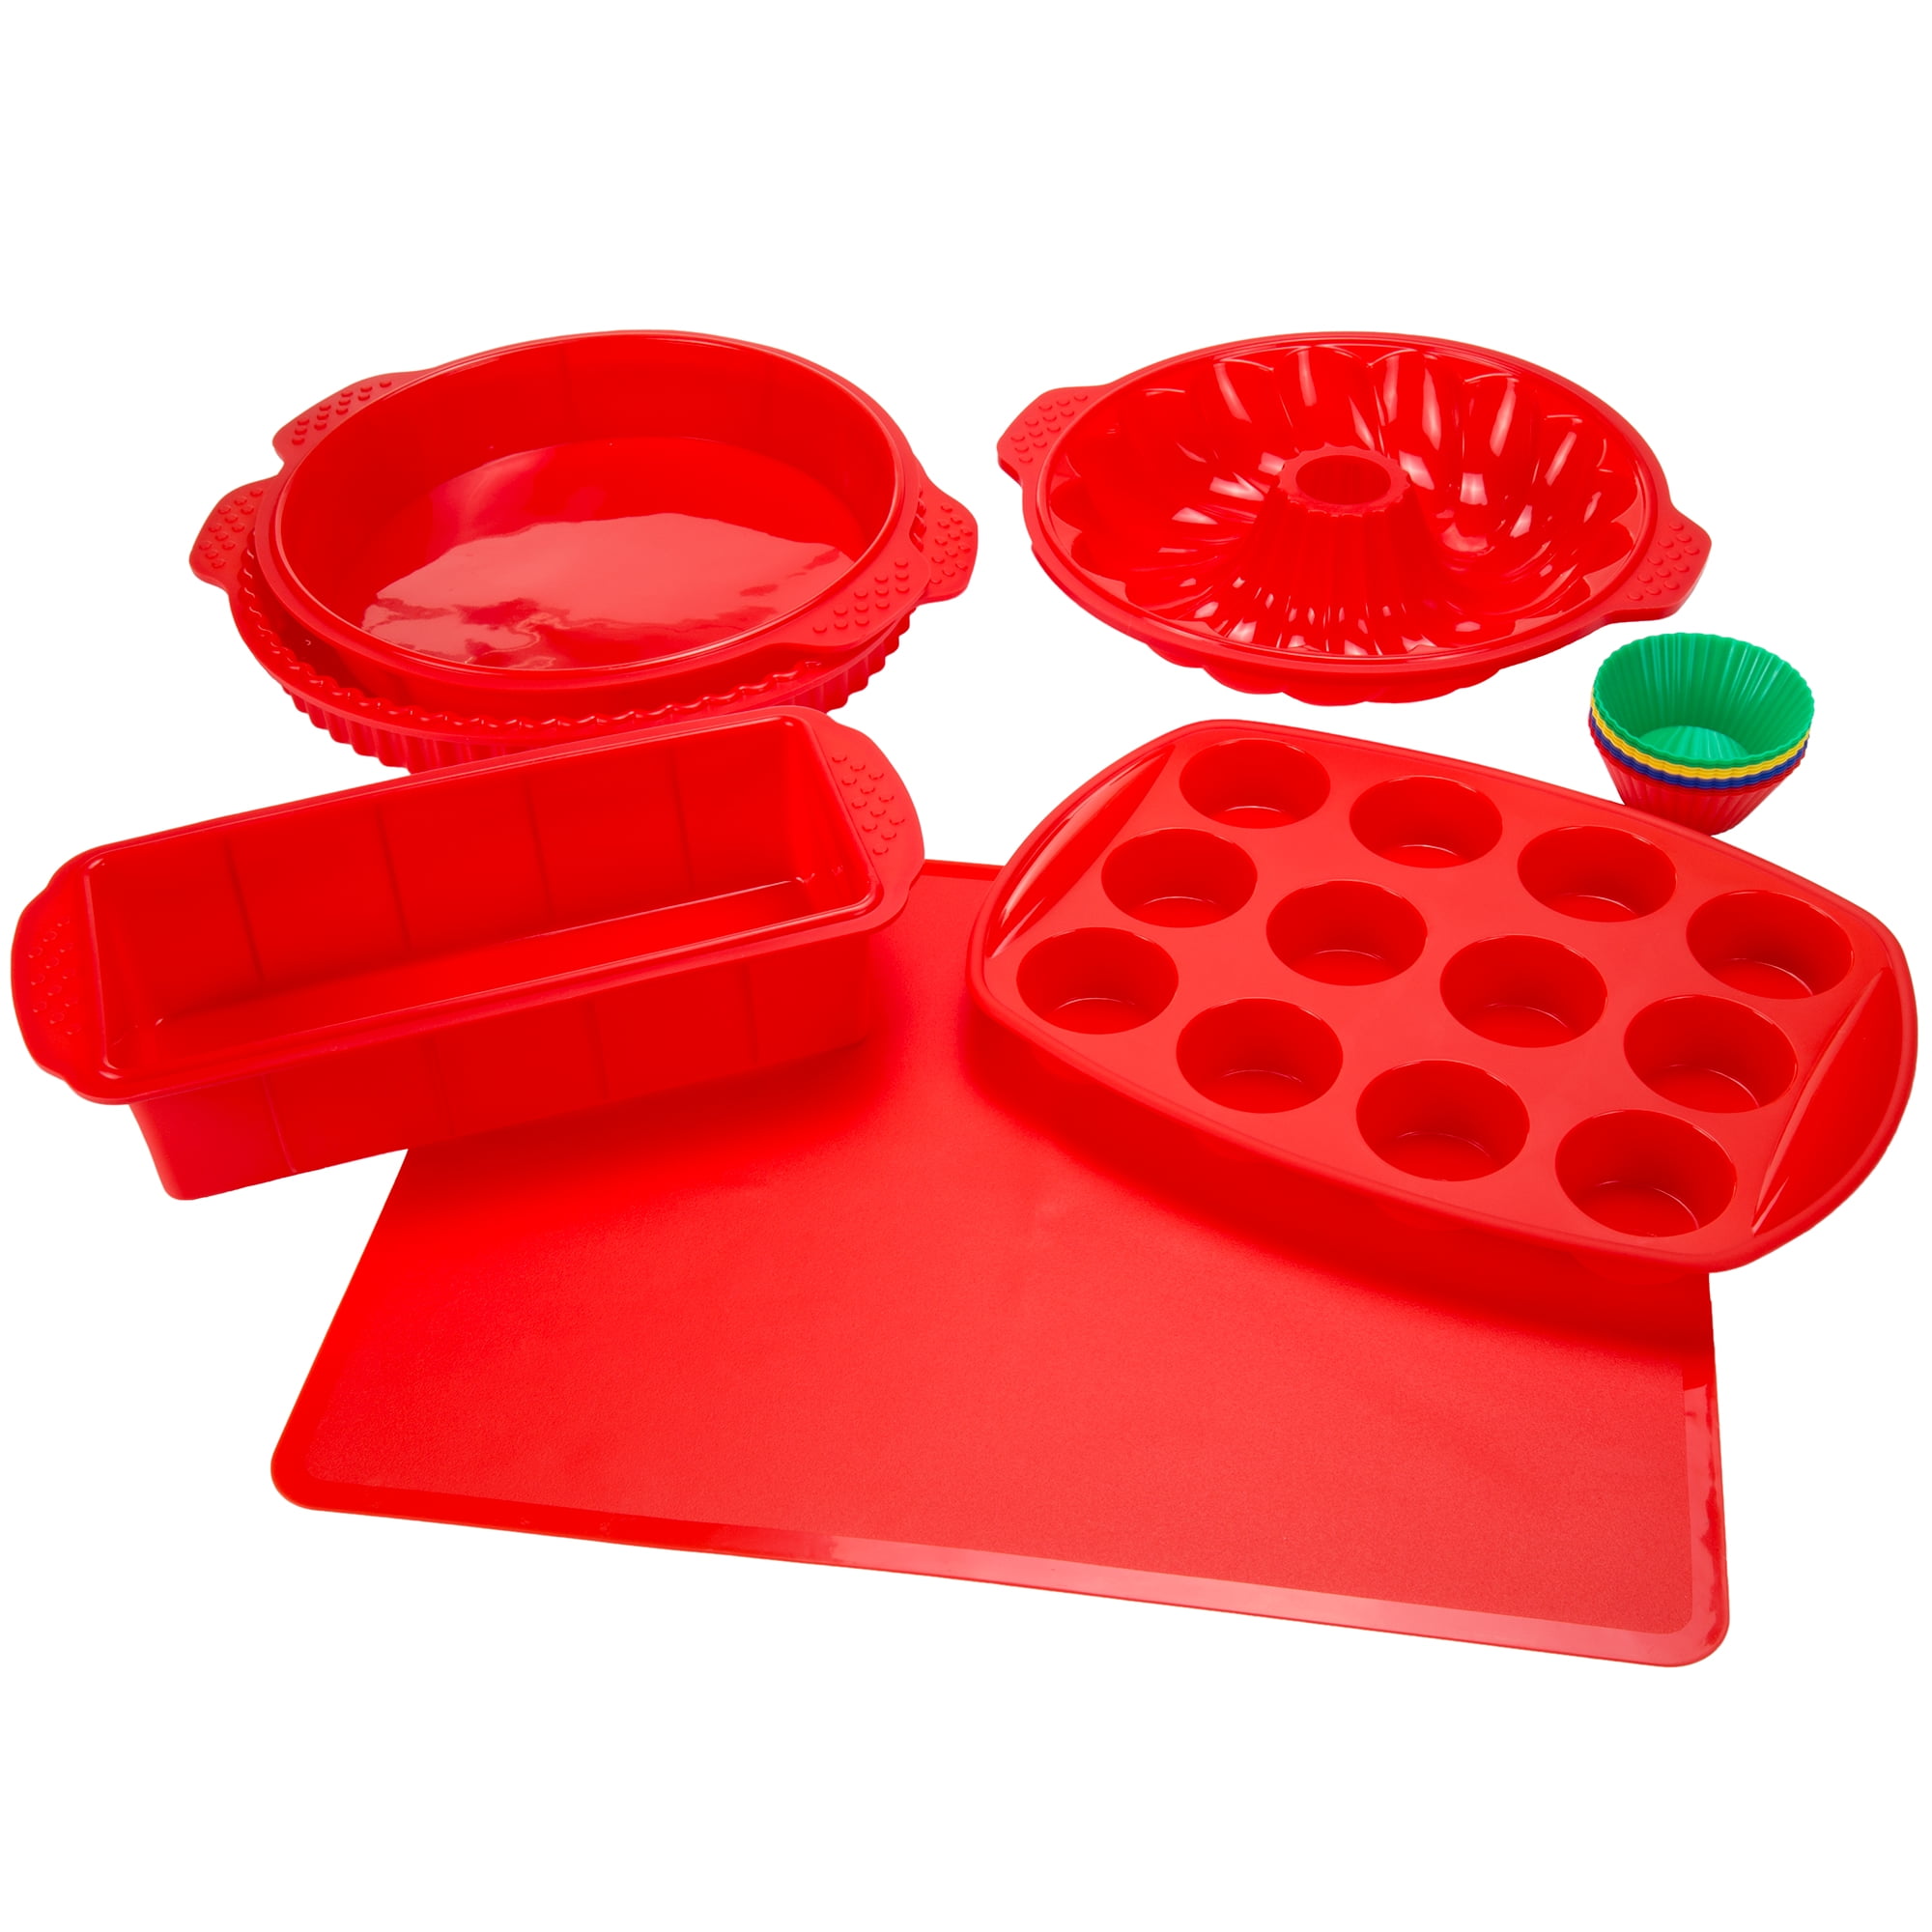 Buy Silicone Baking Pans from Cook'n'Chic®